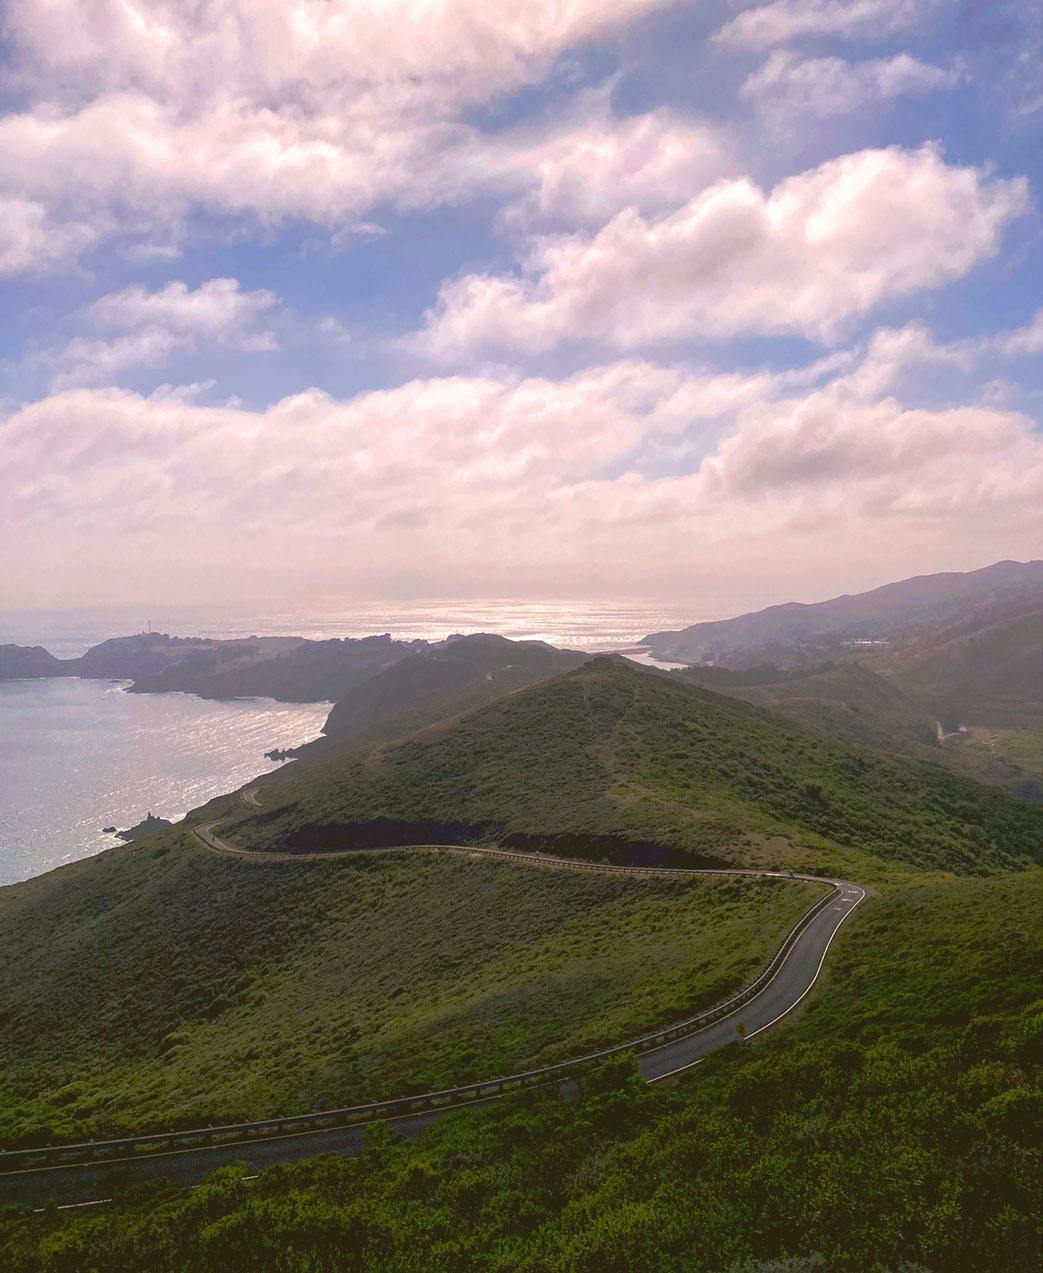 hills of marin headlands with winding road and ocean in the distance